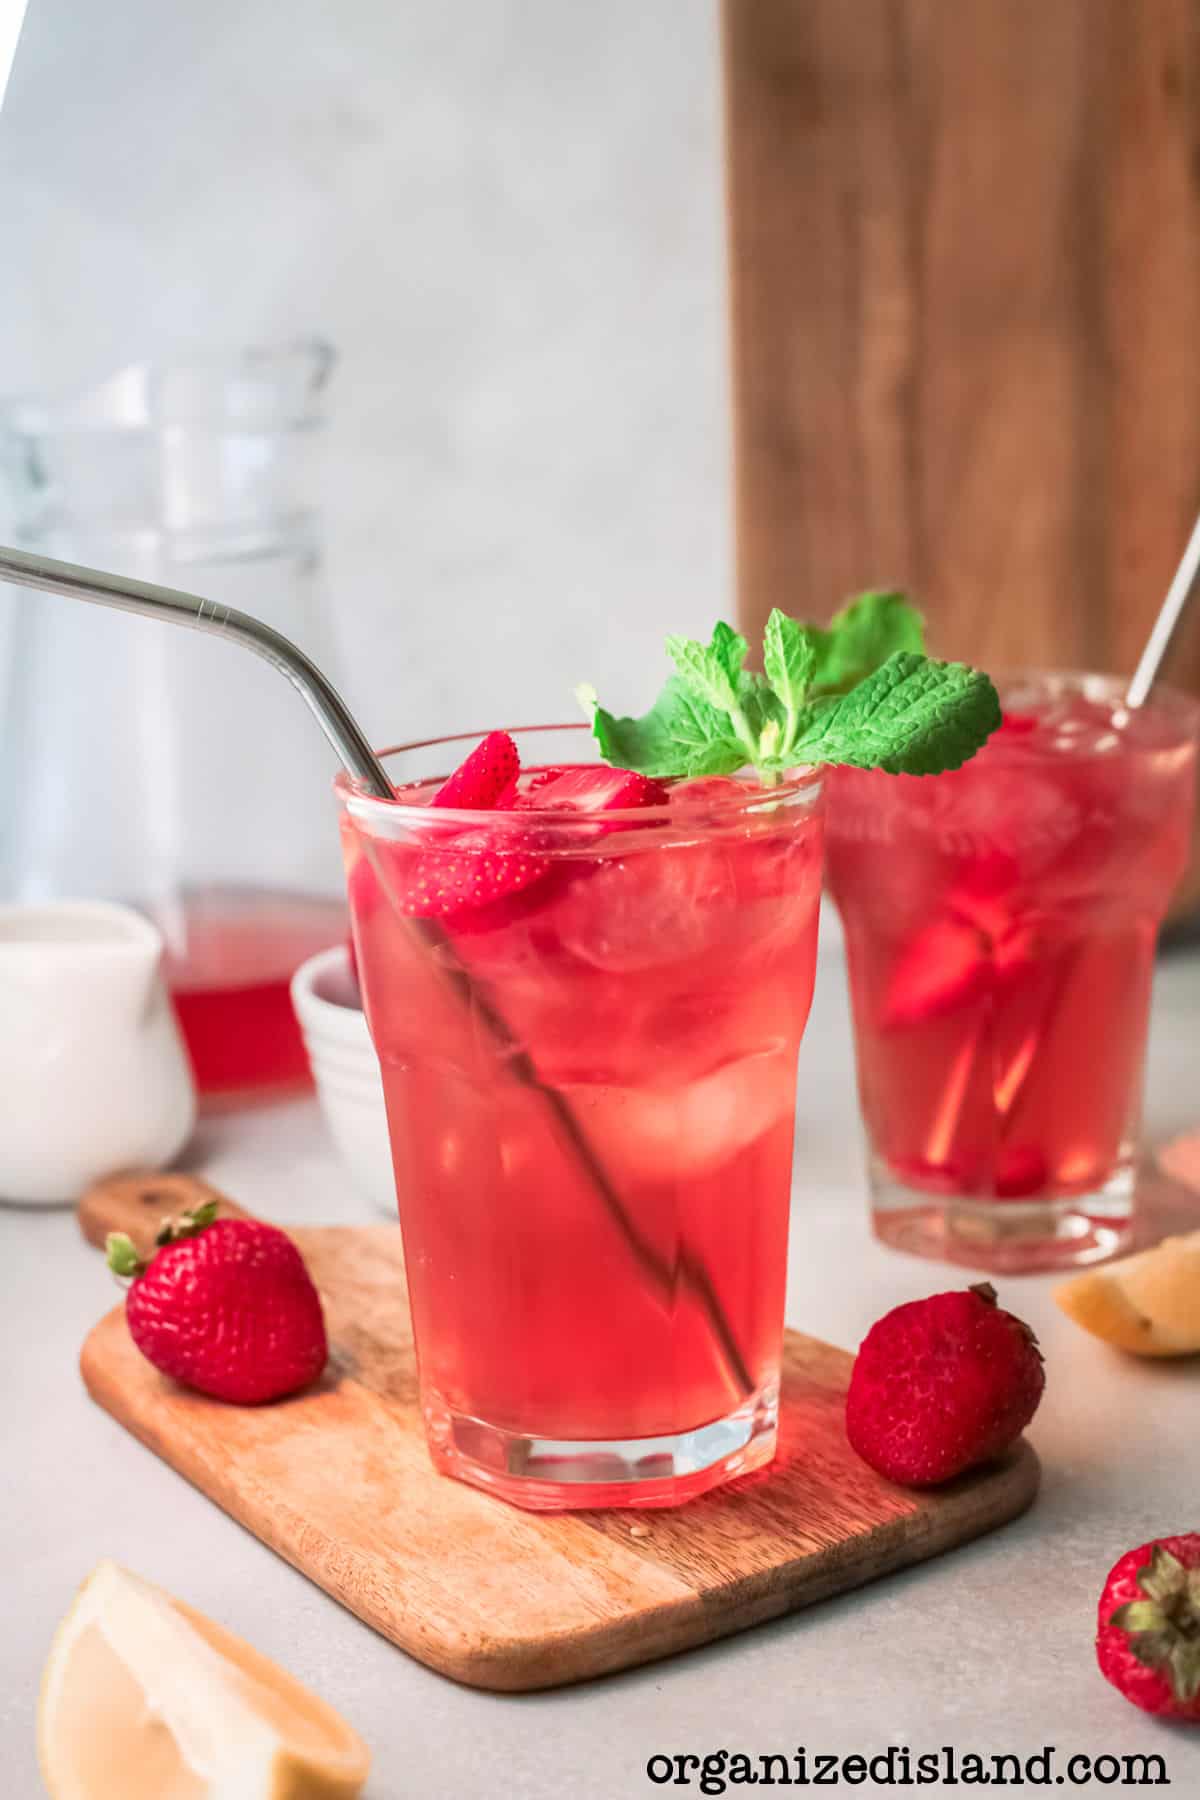 Strawberry iced Tea in glass with mint.